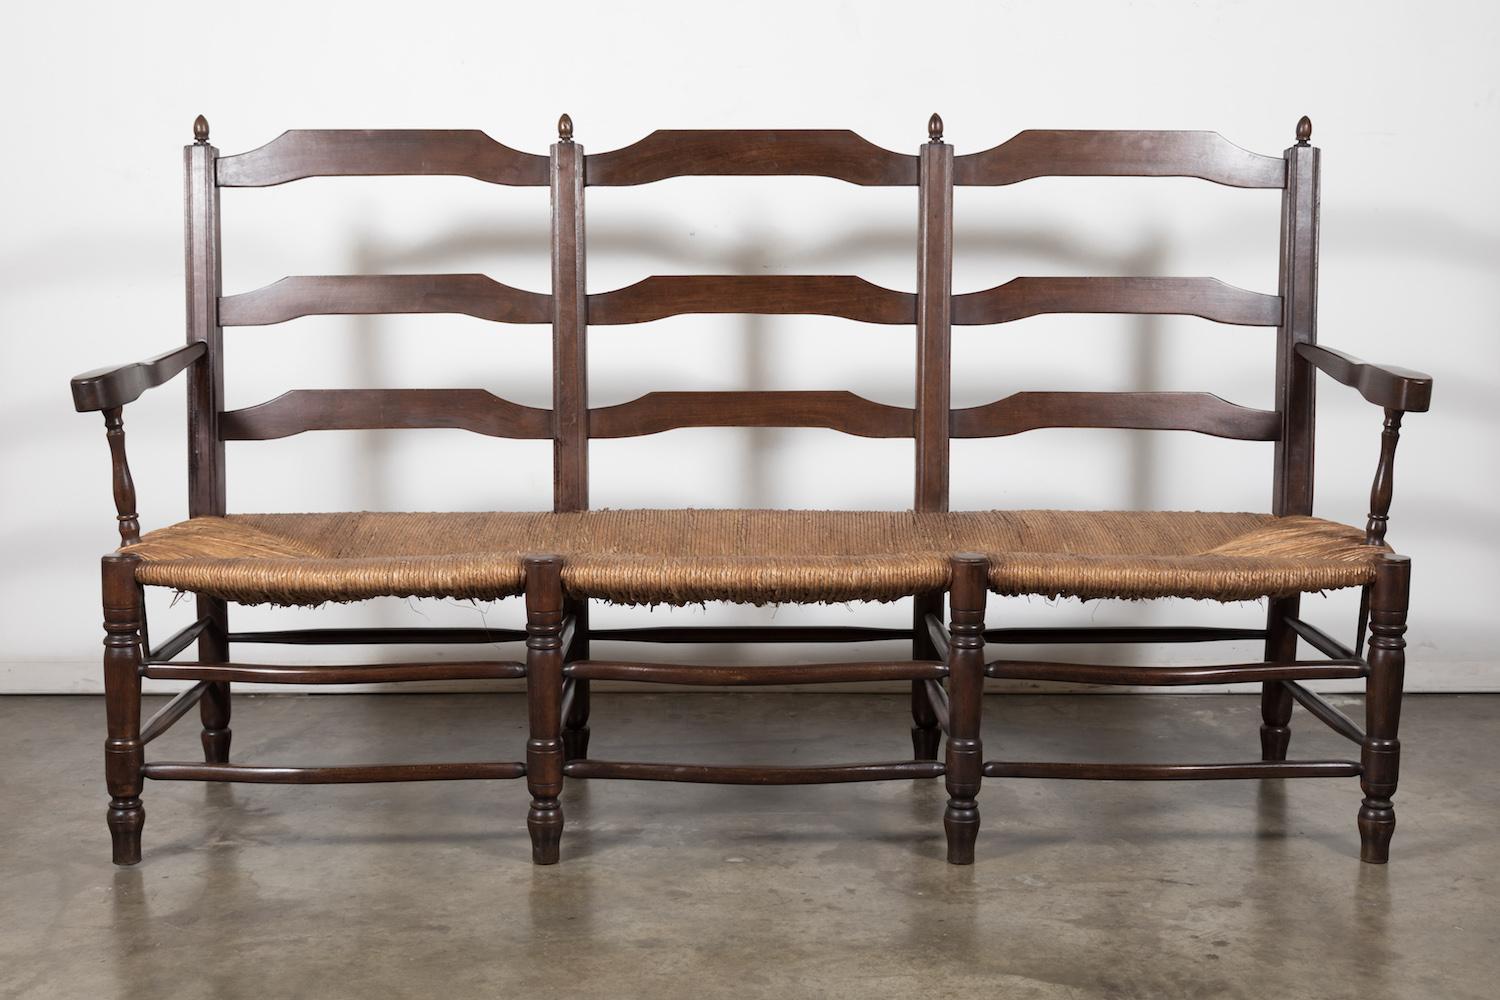 Charming French Country walnut settee or radassier, circa 1930s. This double arm bench from Provence seats three and features a handwoven rush seat and ladder-back. A wonderful rustic look that captures the feeling of rural France. Simple yet